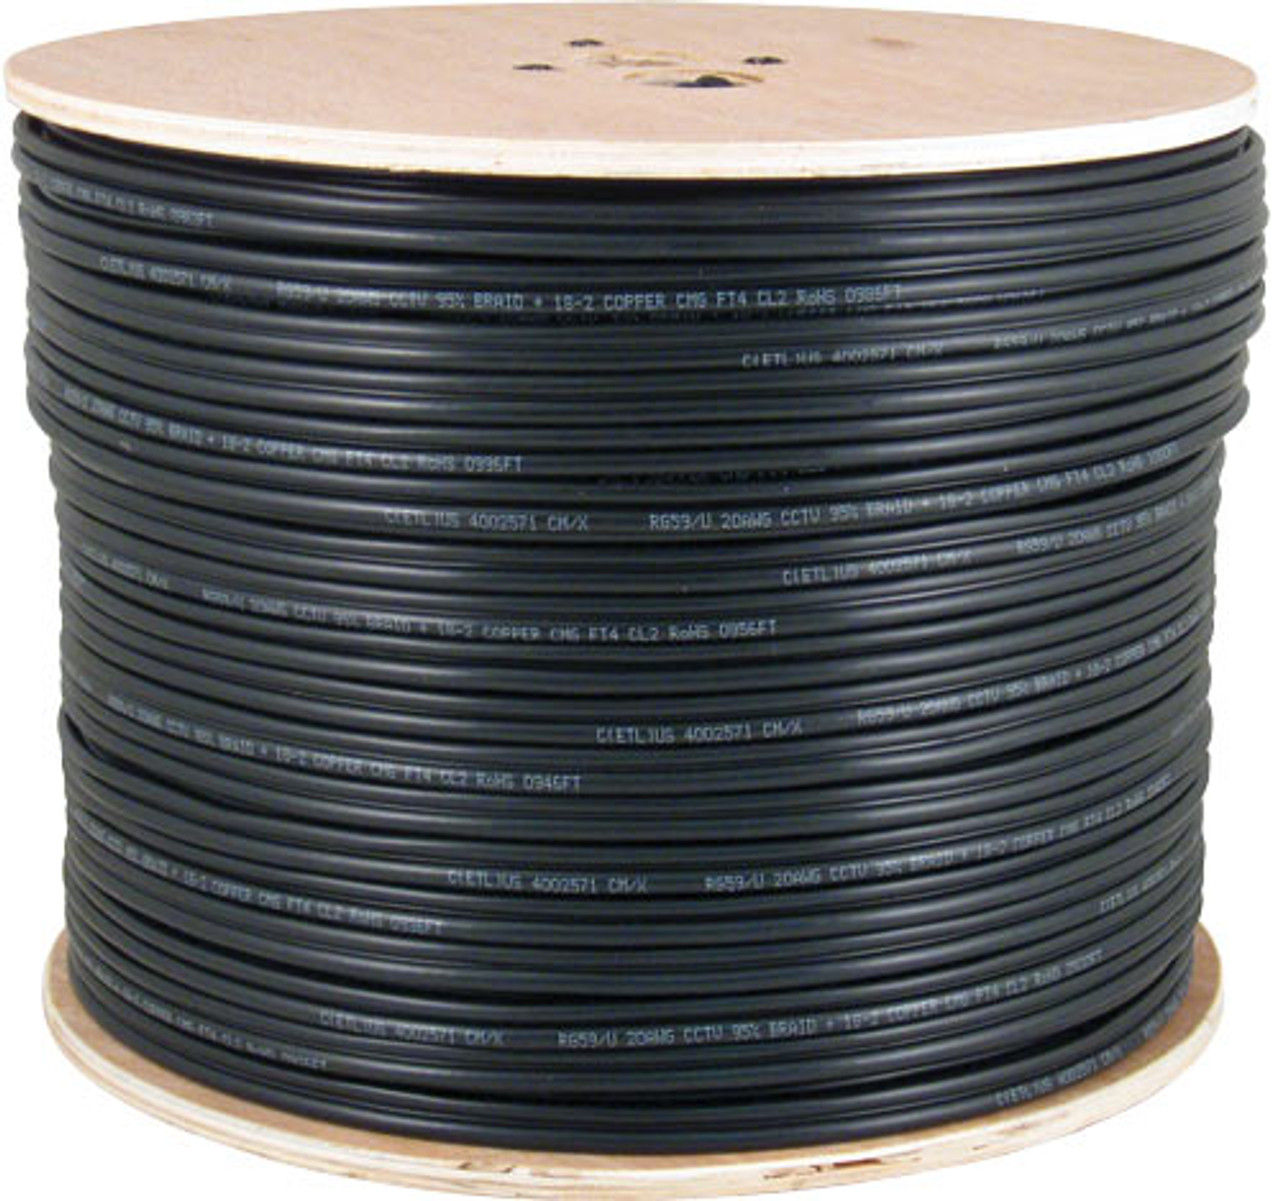 CAT6 Outdoor Rated Cable with Messenger LLDPE Jacket 23AWG Solid-Bare Copper 1000ft Spool, Black